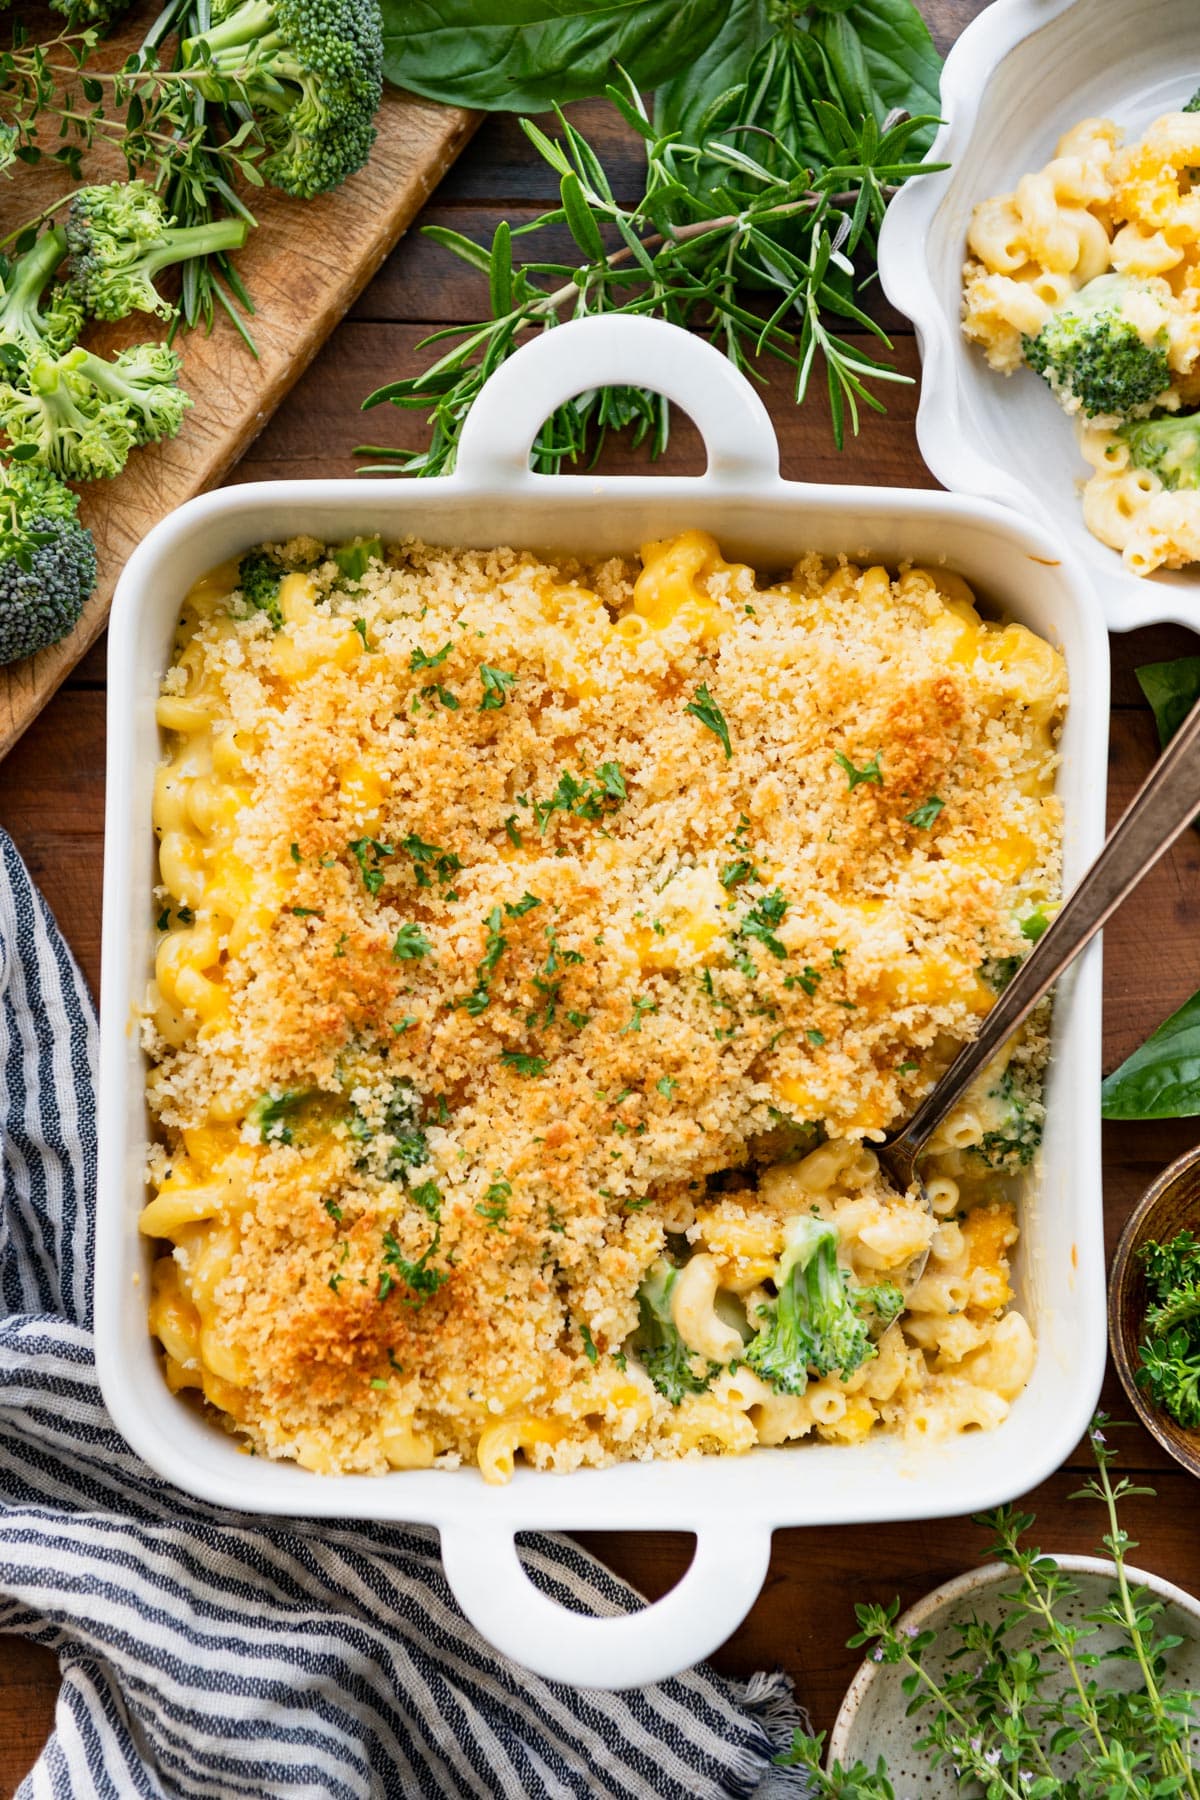 Spoon in a white dish full of broccoli cheddar mac and cheese recipe.